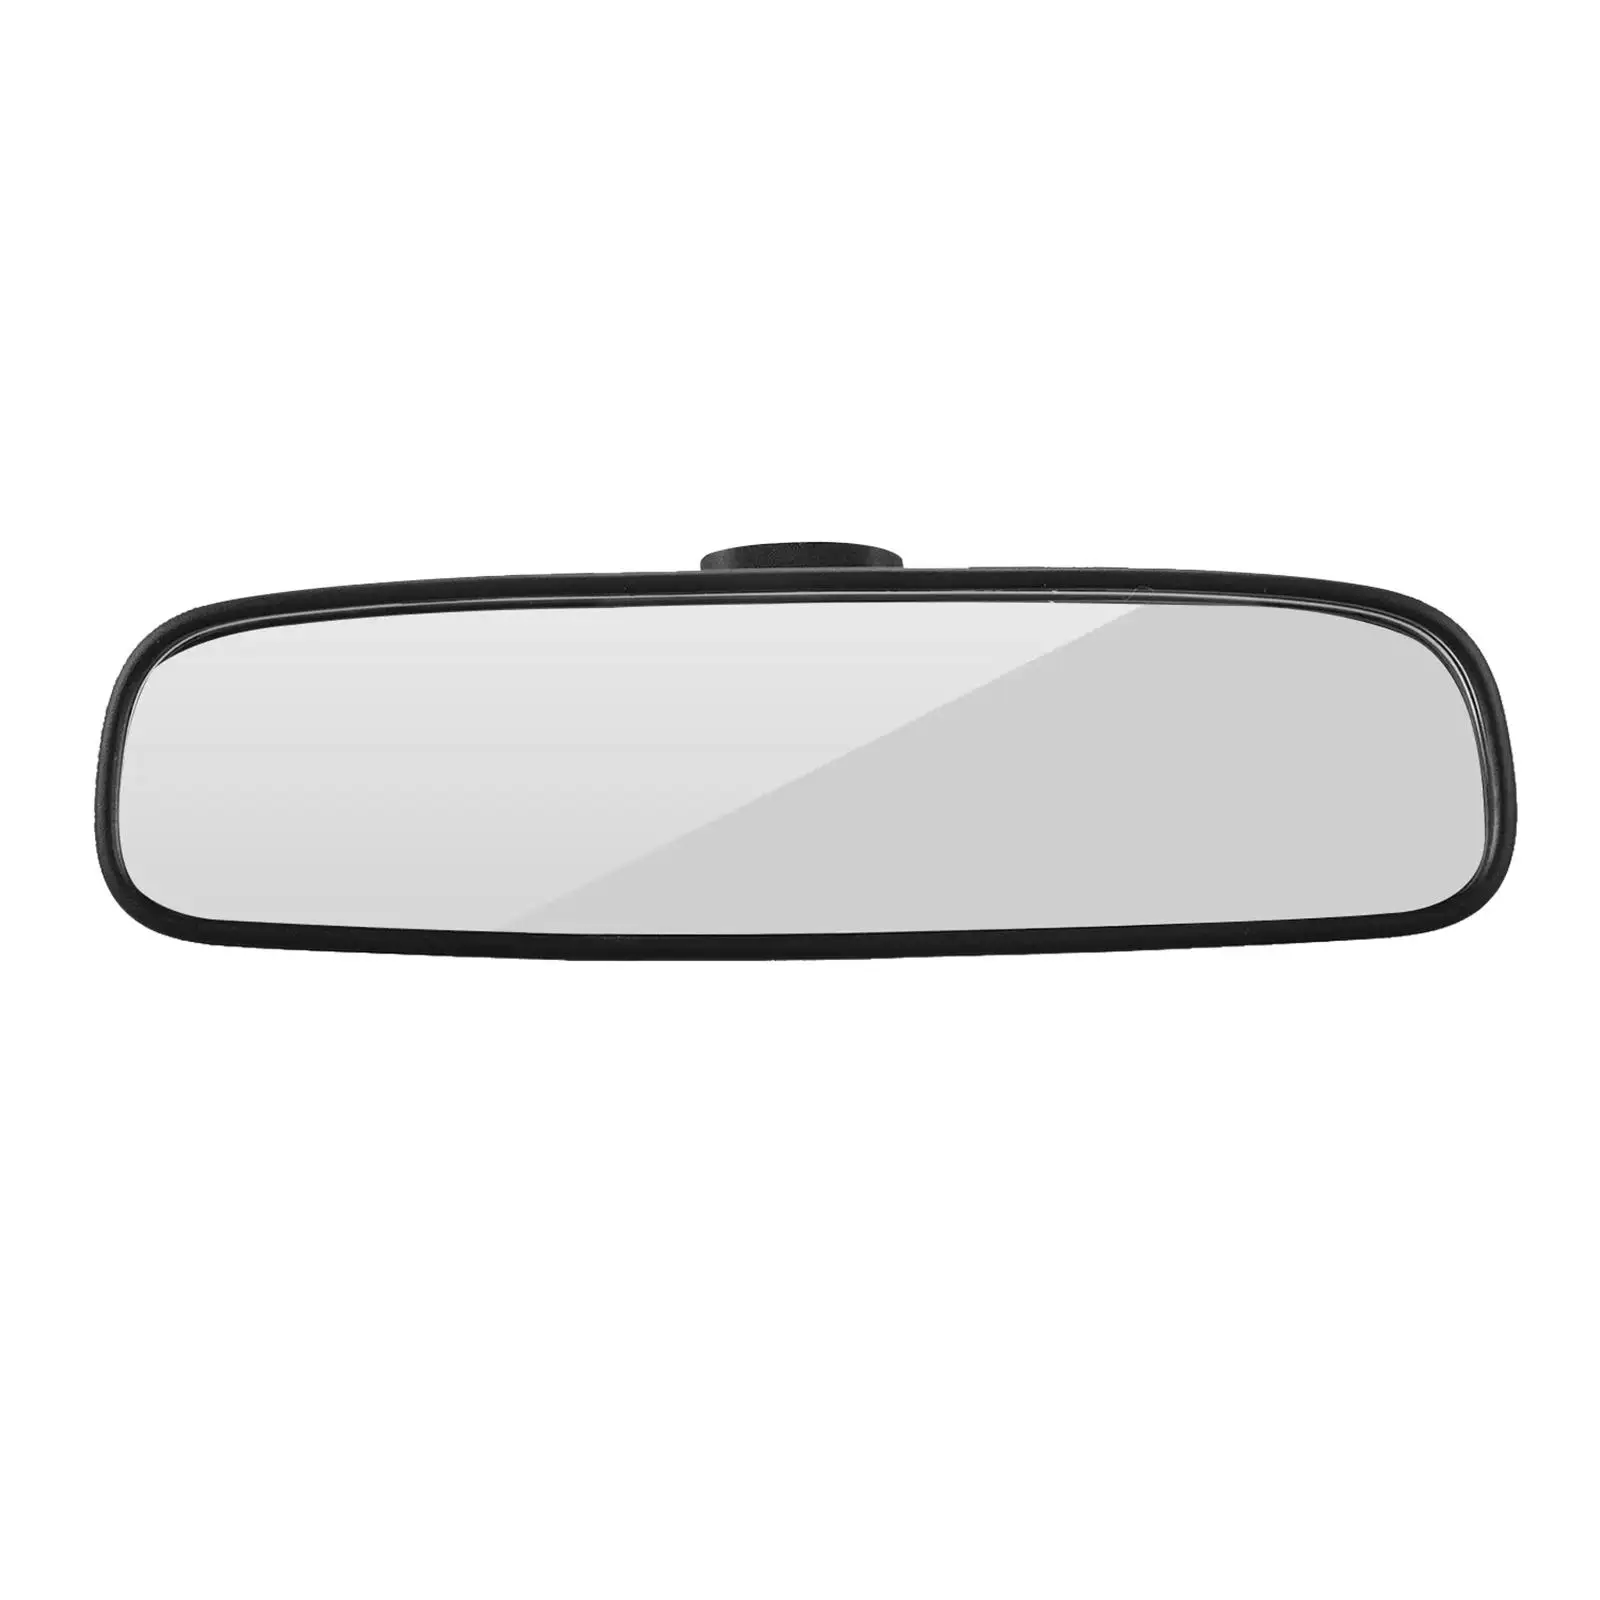 Rear View Mirror 76400-sea-014 Easy to Install Replacement Assembly Automotive 76400-sea-305 76400-sea-024 for Accord Cr-